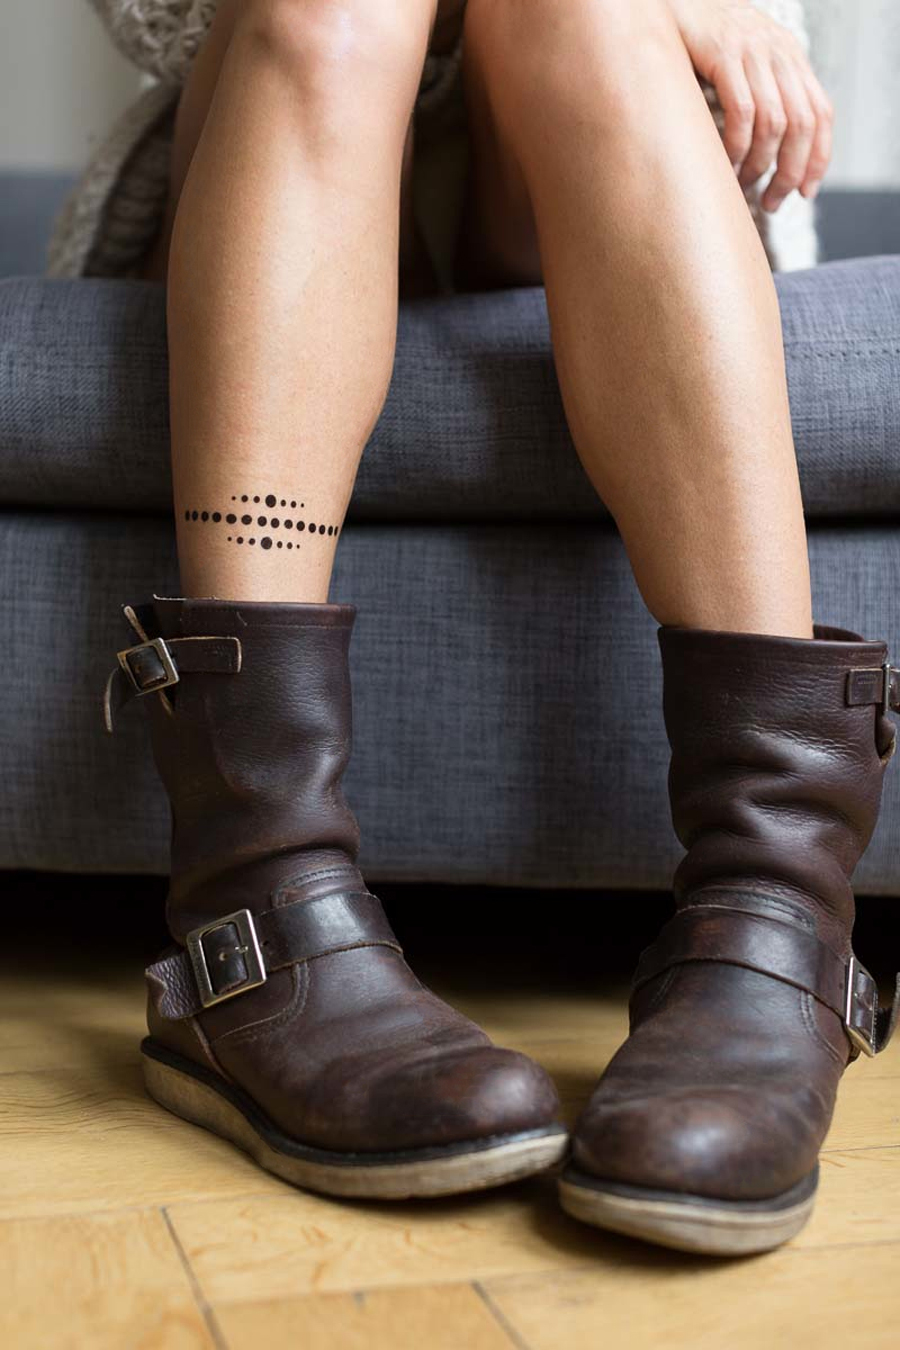 LOOK WHO MADE IT: Janine Schmidt, designer of temporary tattoos and founder of FONRY